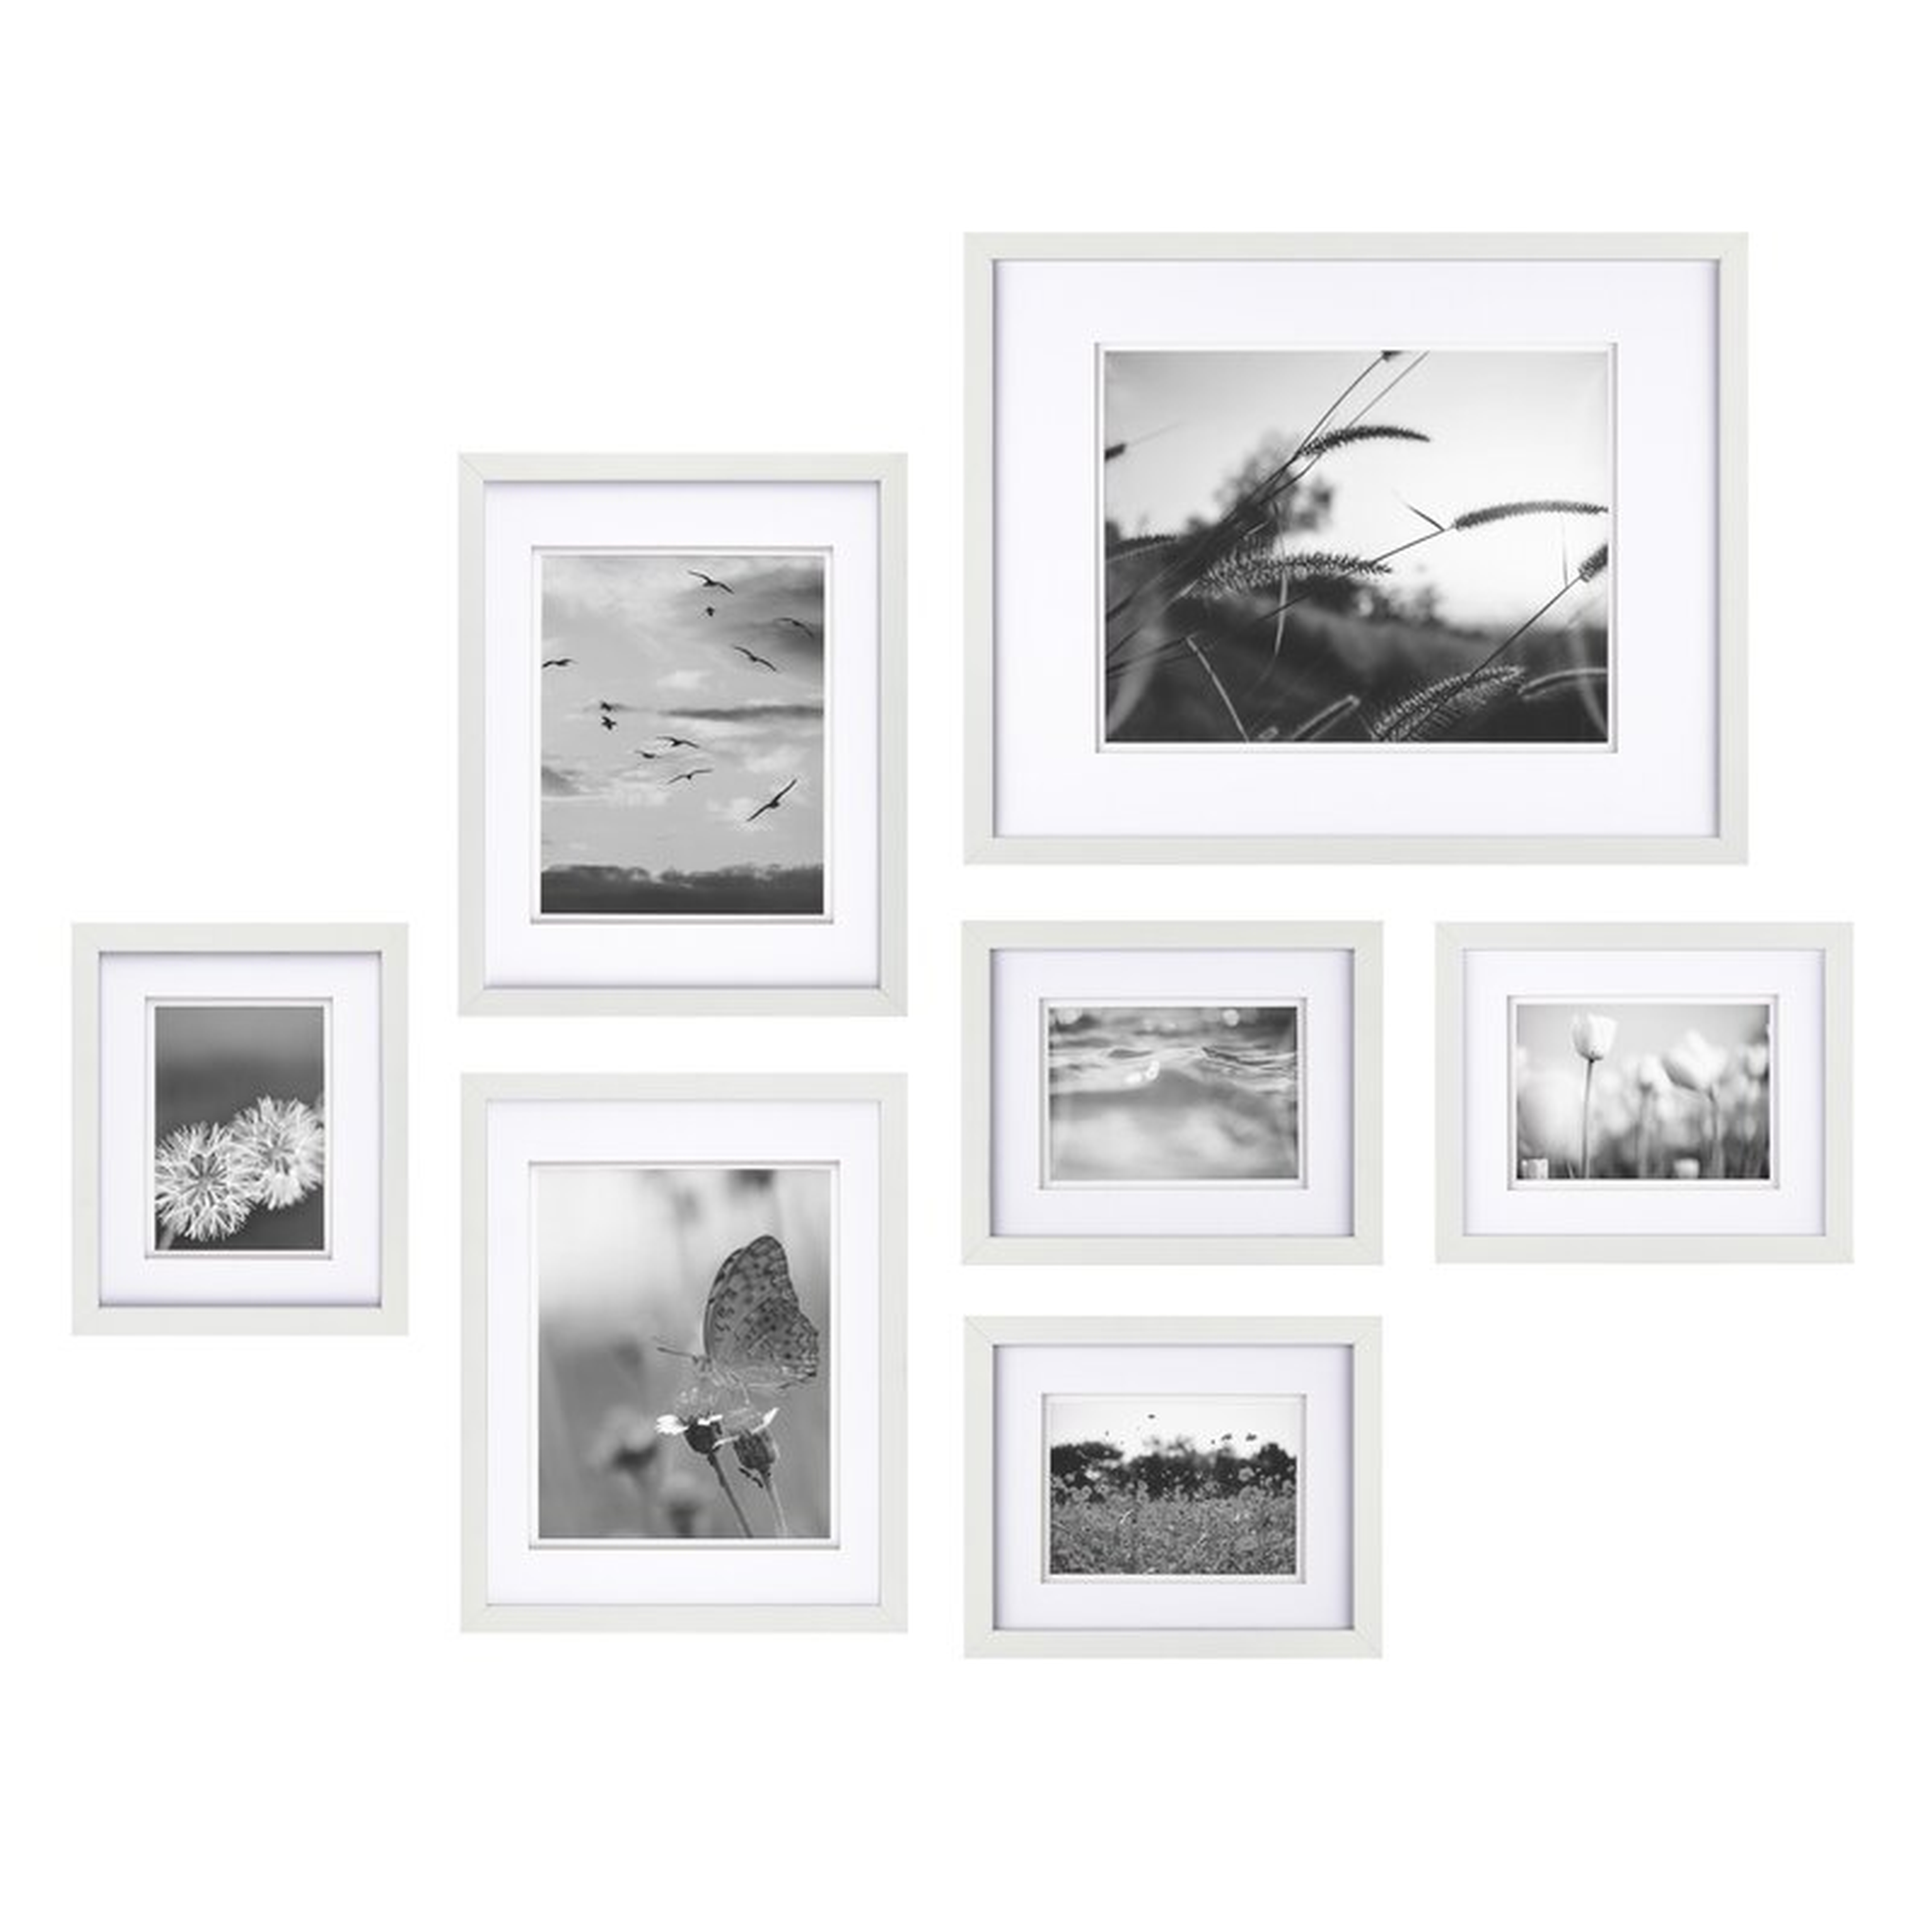 Goin 7 Piece Build a Gallery Wall Picture Frame Set - White Frames - Wayfair